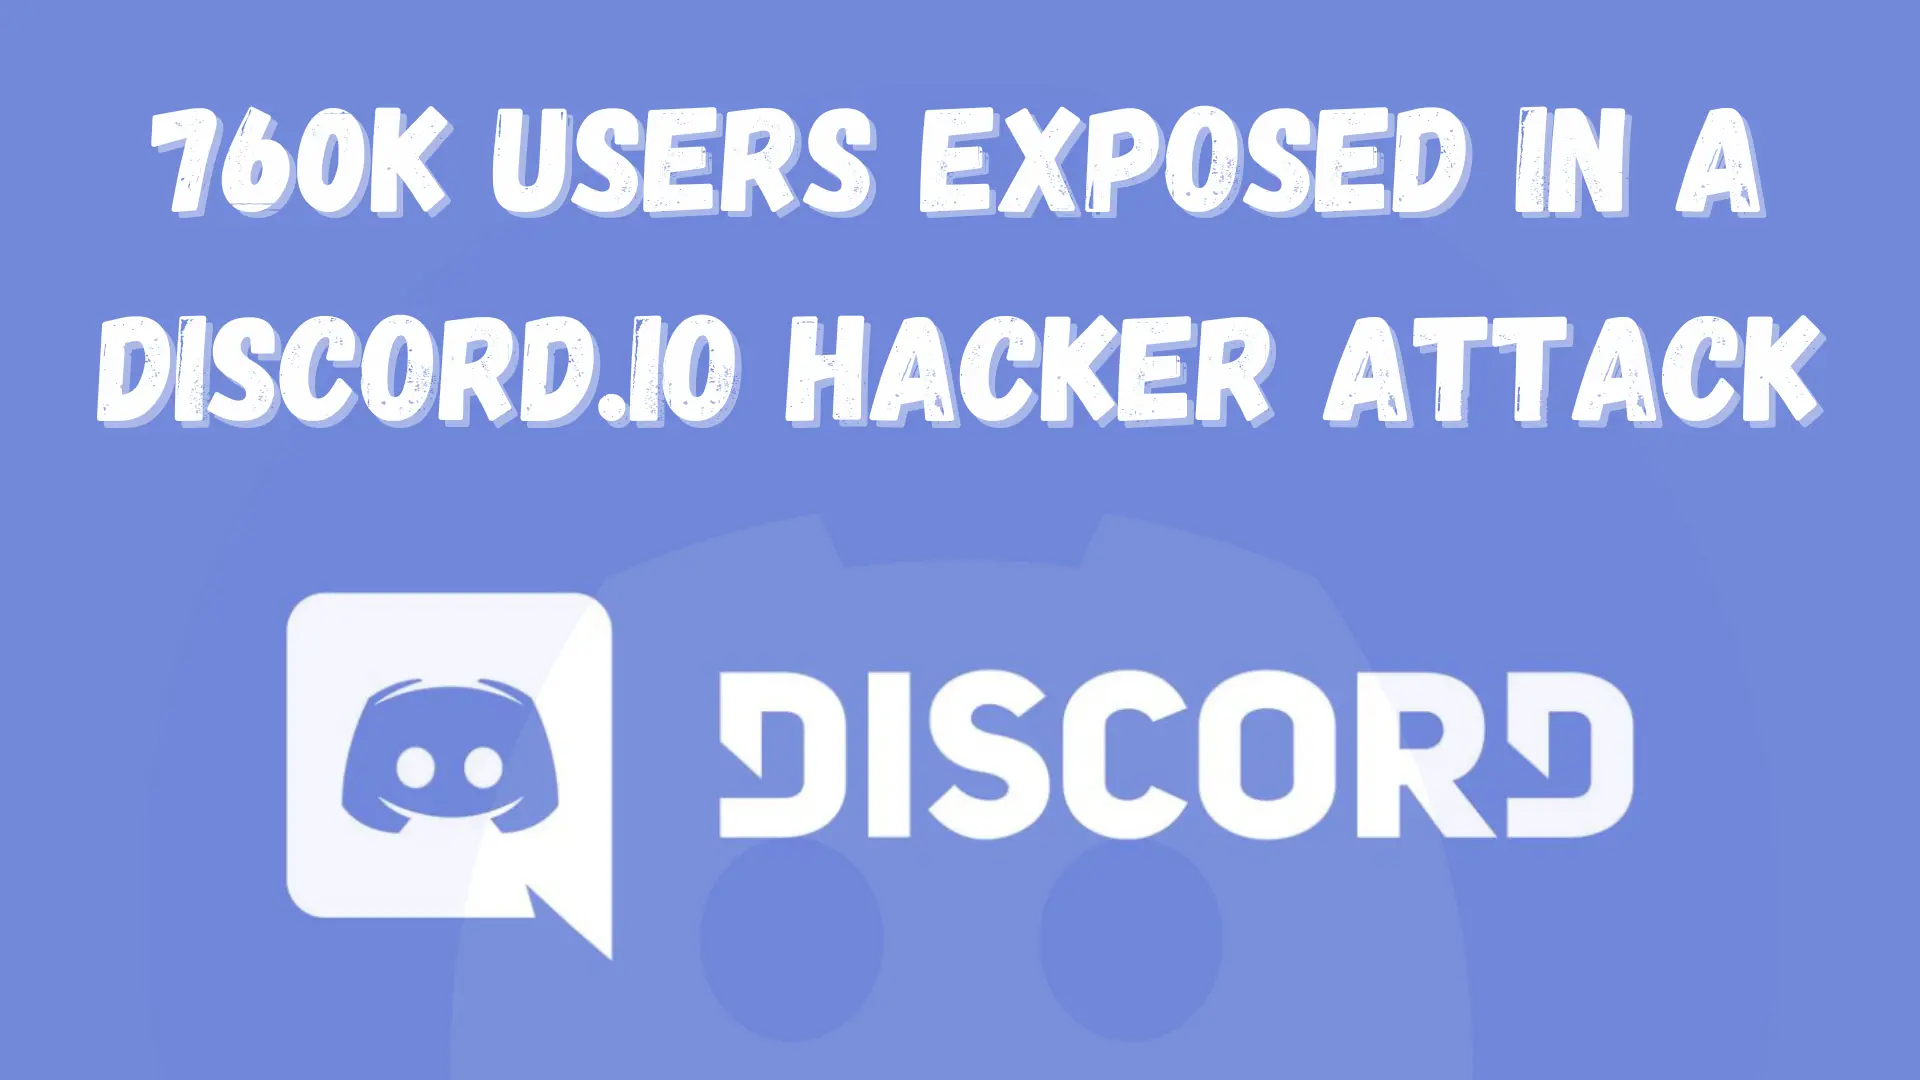 760k Users Exposed in a Discord.io Hacker Attack